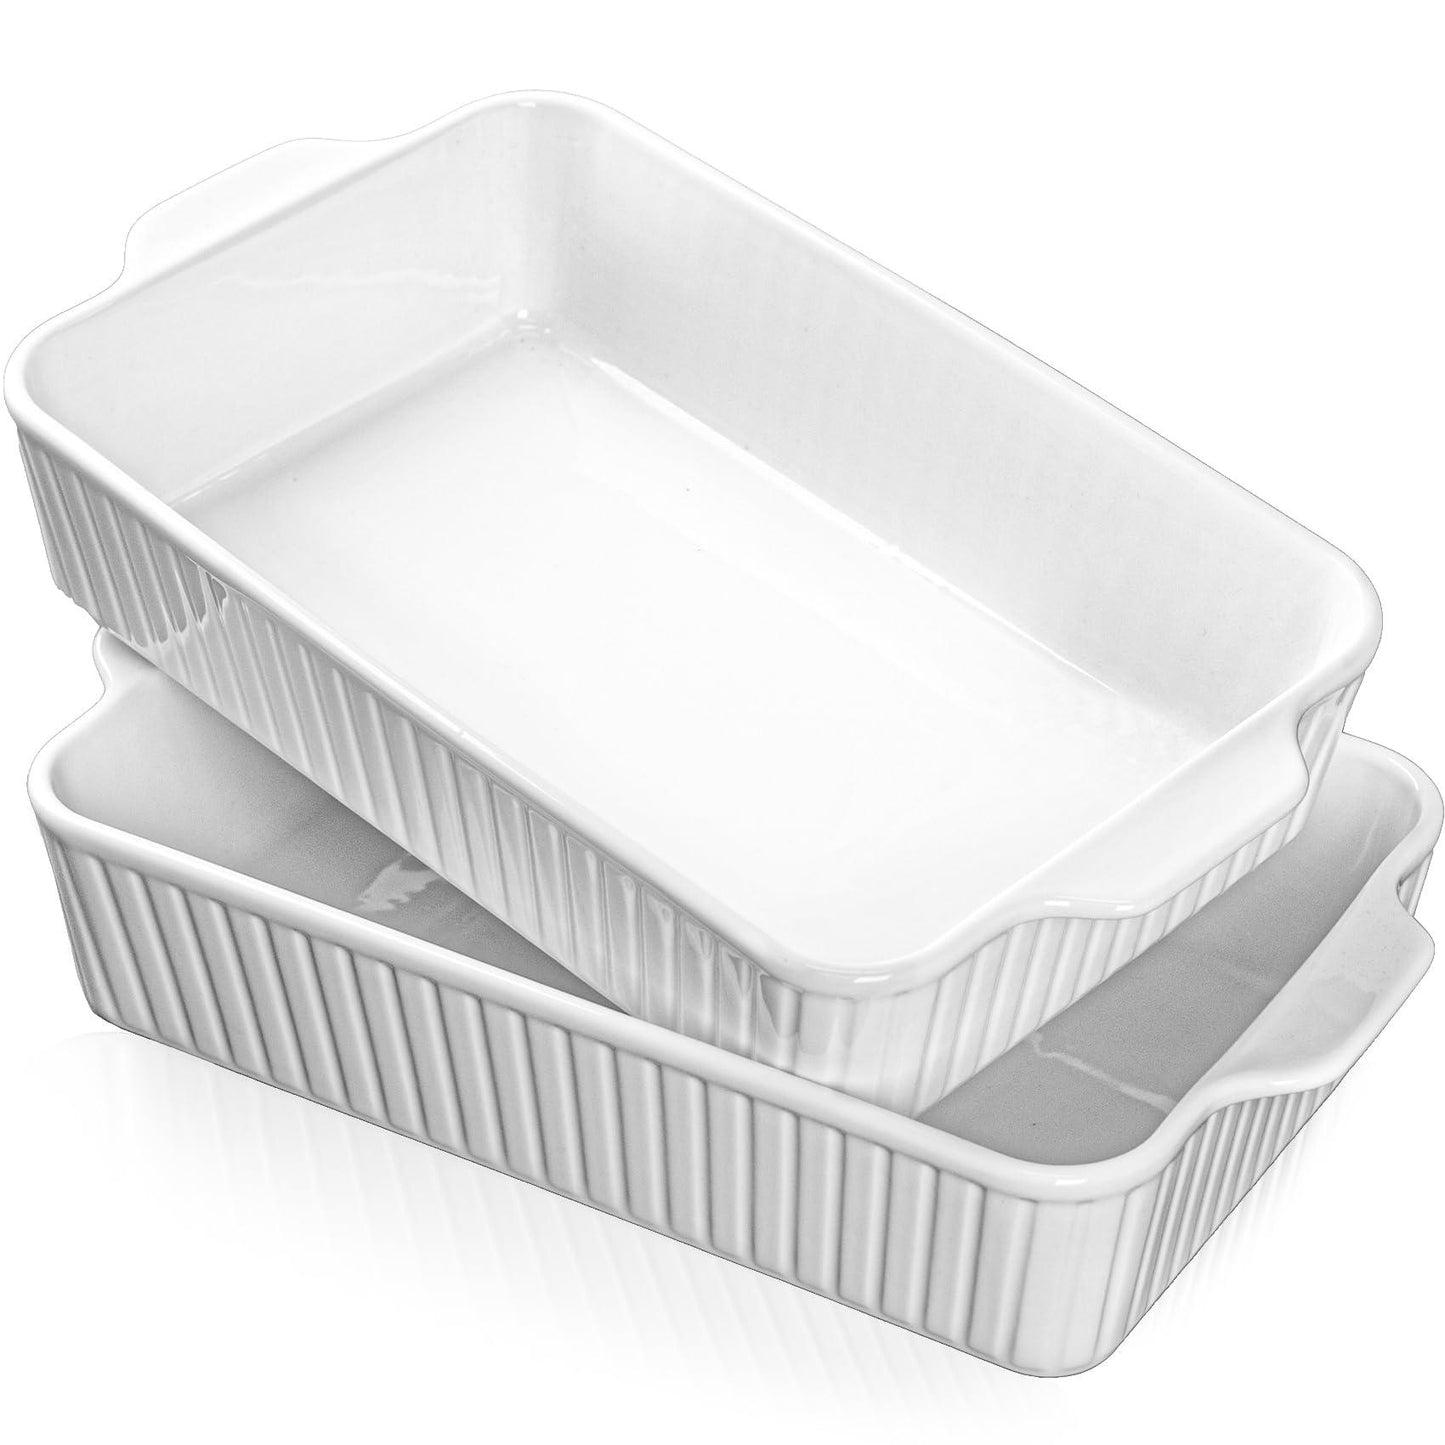 Casserole Dishes for Oven 9x13,2 Pack Ceramic Baking Dish Large & Deep,135 OZ Casserole Dish Set with Handles Durable Bakeware for Lasagna, Roasts, Cake Cooking, Lasagna Pan Sets Nonstick-Microwave - CookCave